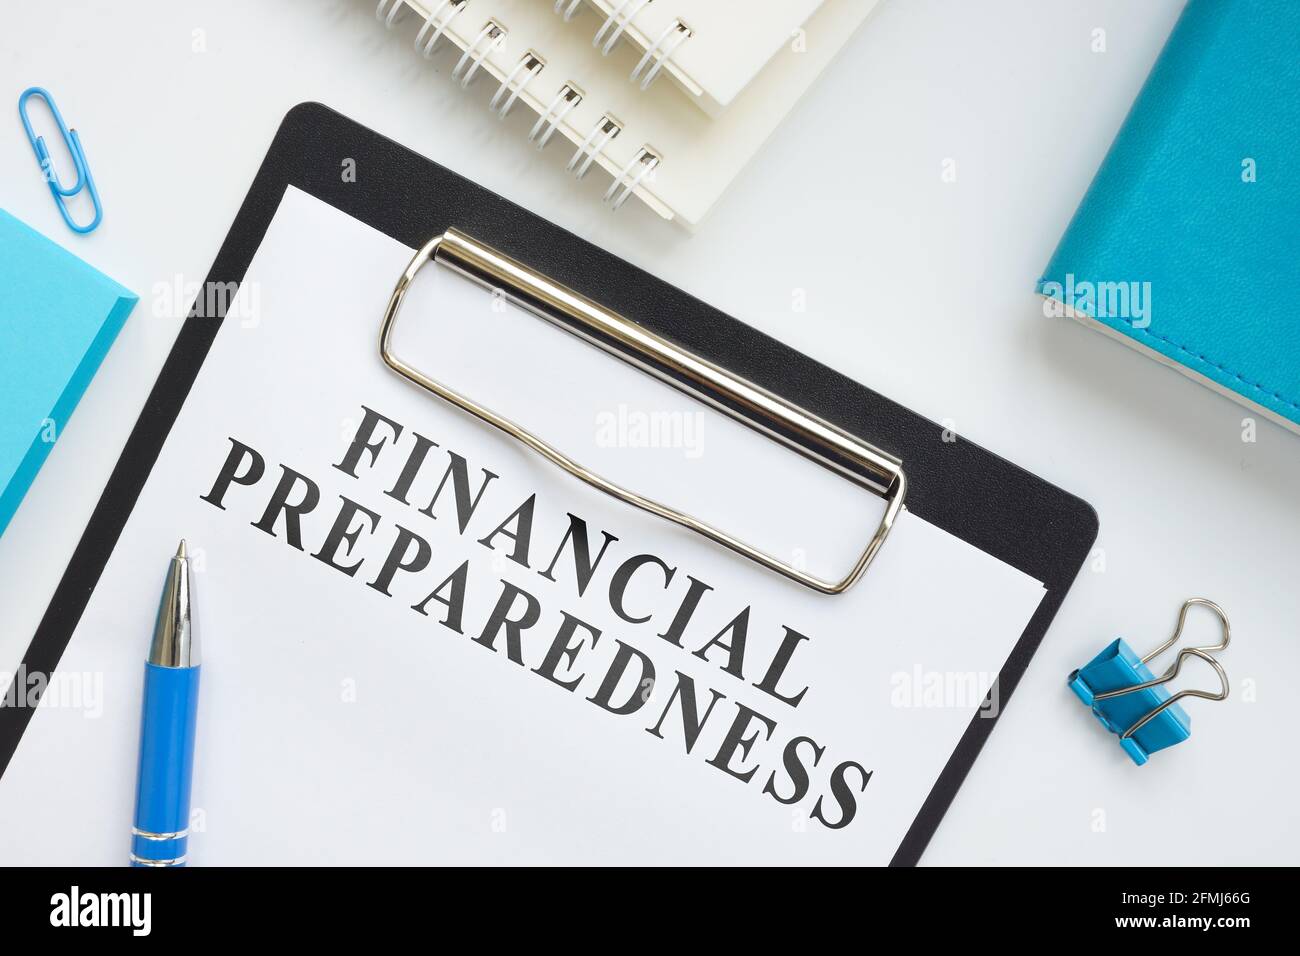 Financial Preparedness plan and office supplies on the surface. Stock Photo